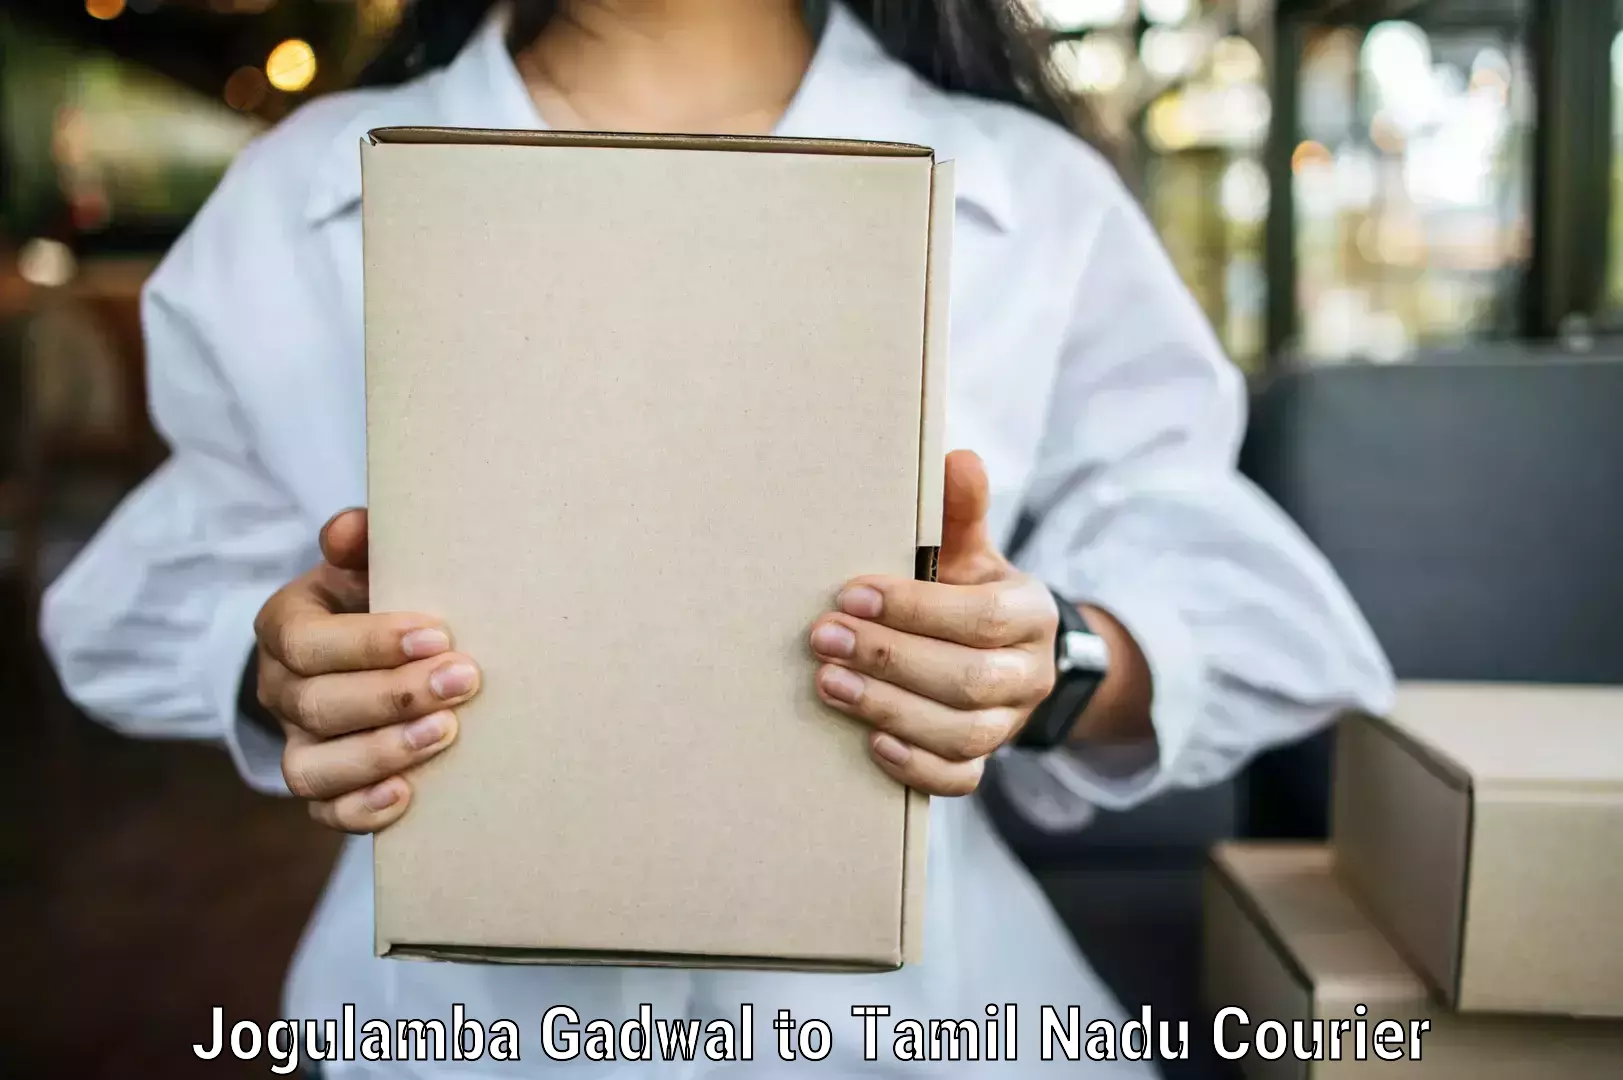 Quality courier services in Jogulamba Gadwal to Anthiyur